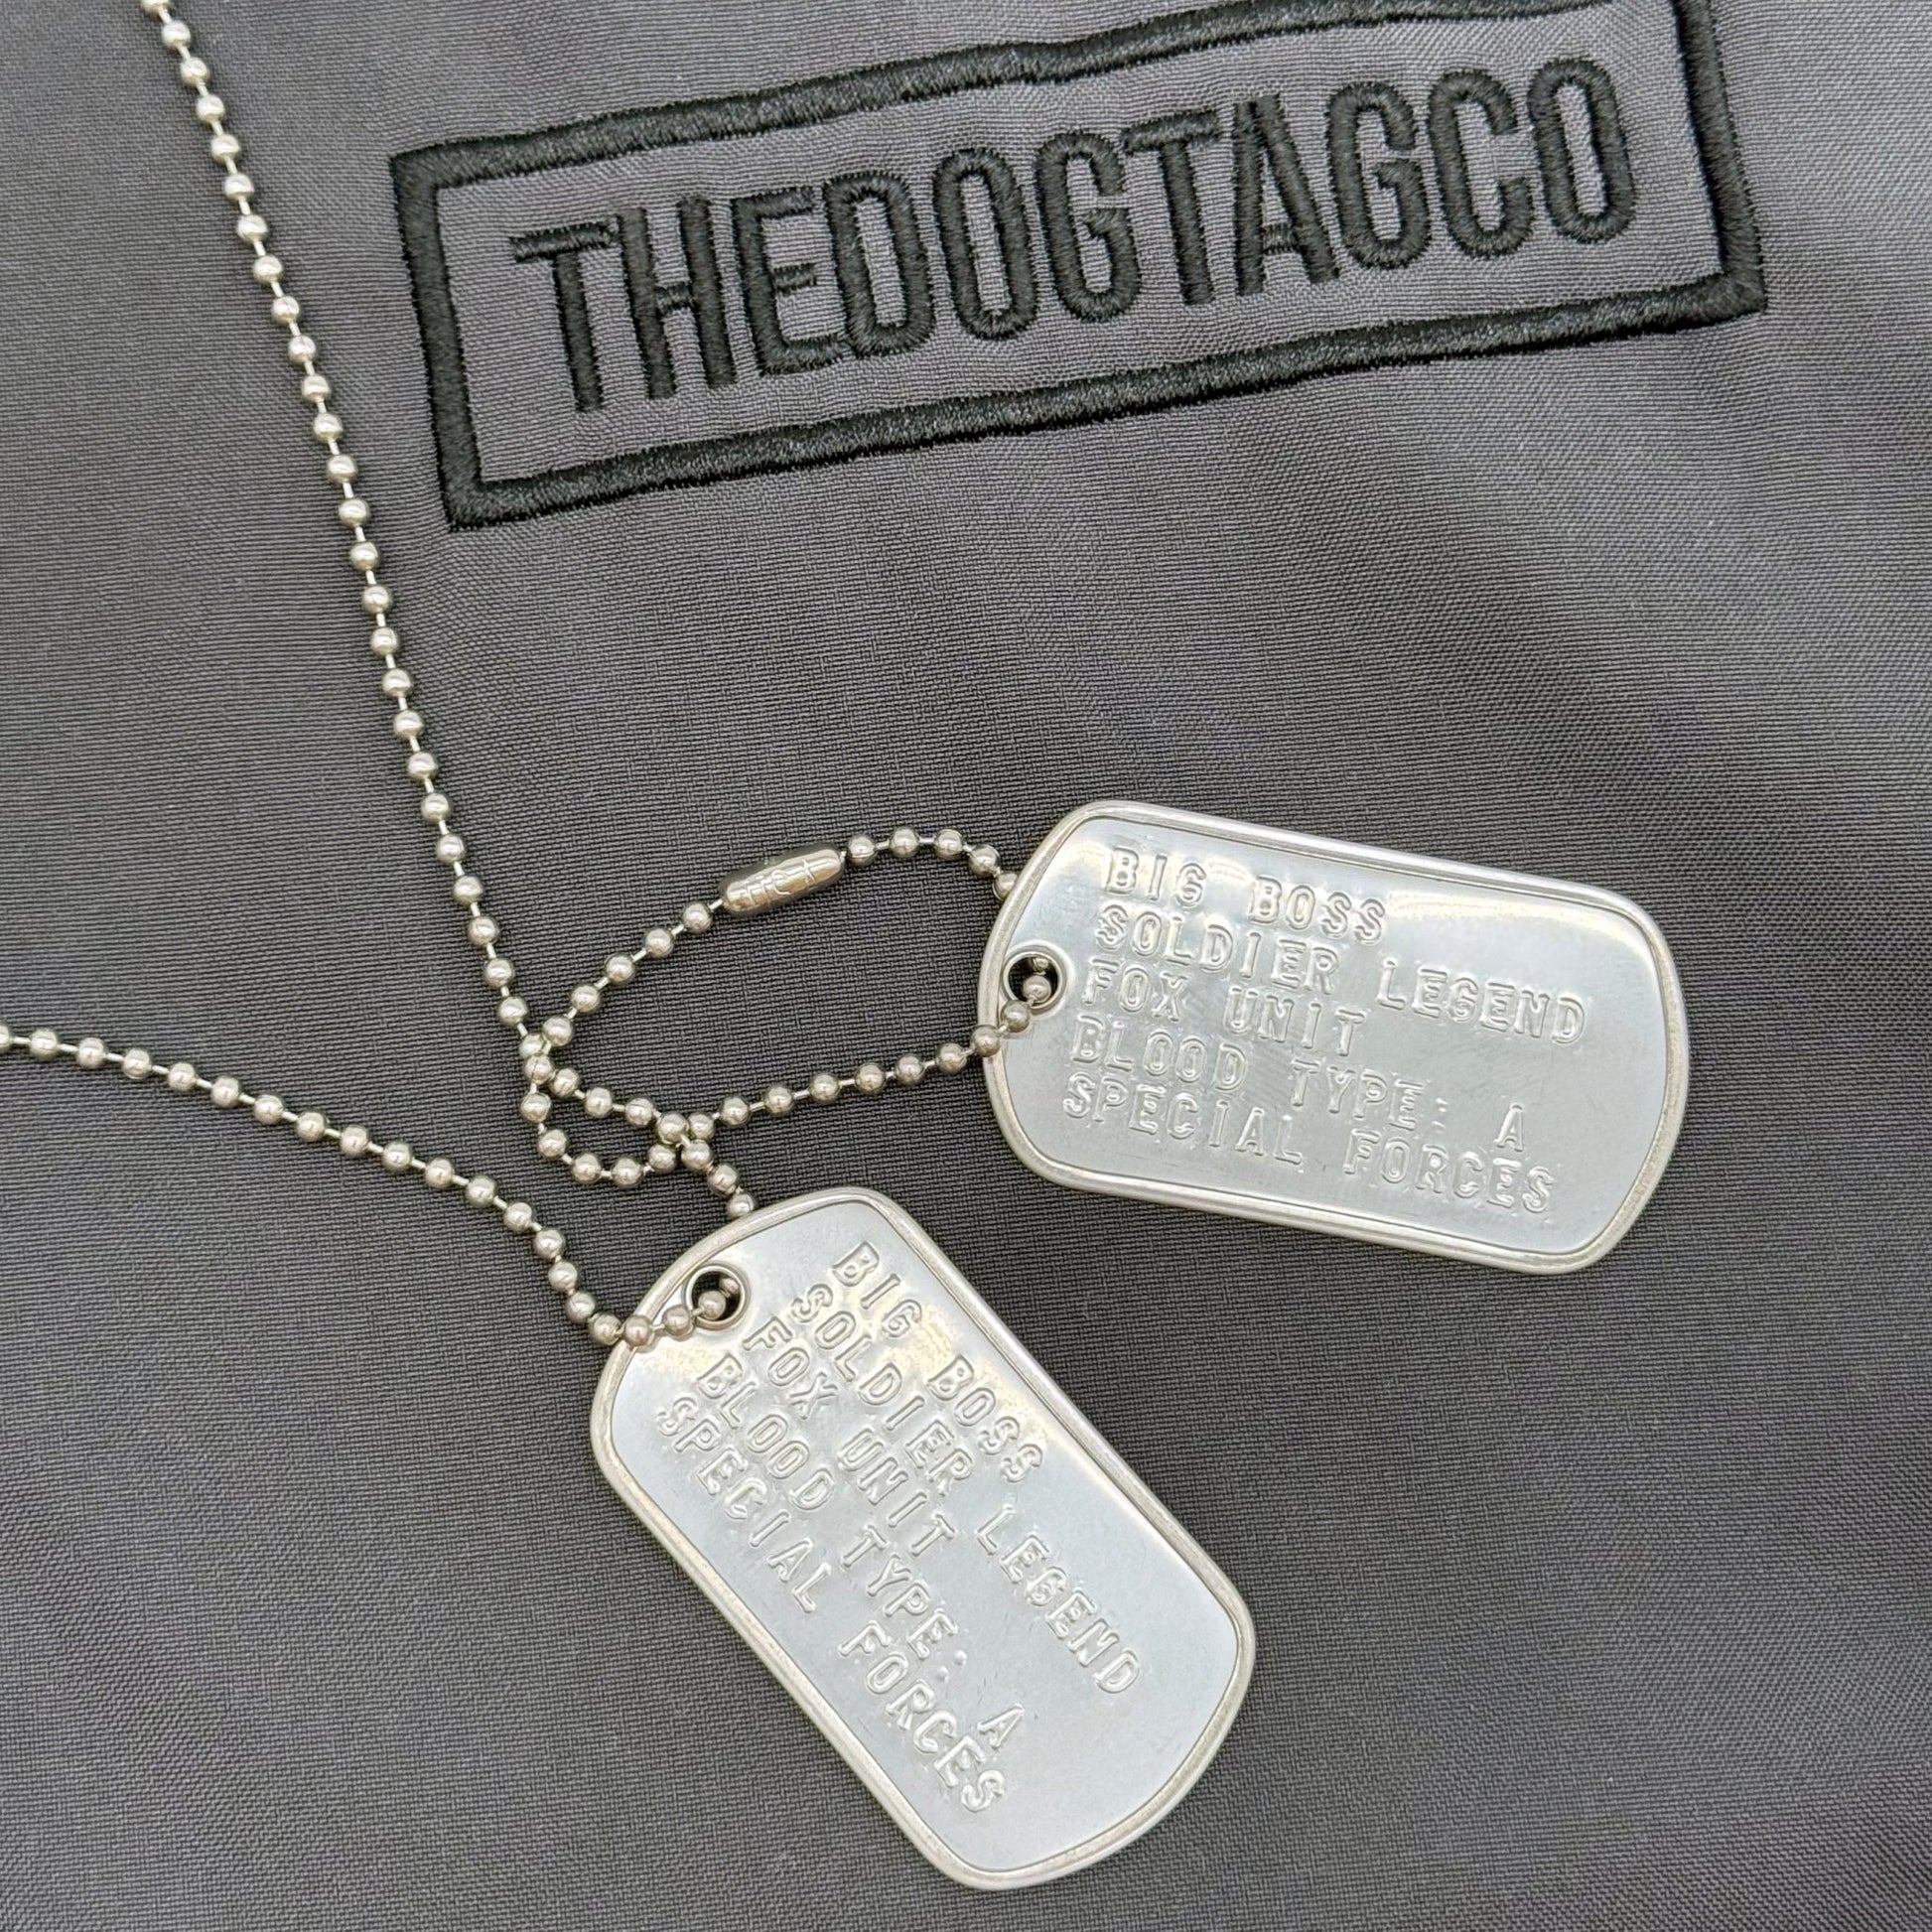 BIG BOSS US Military Dog Tags Necklace Pendant Gaming Gift Collector Replica - TheDogTagCo